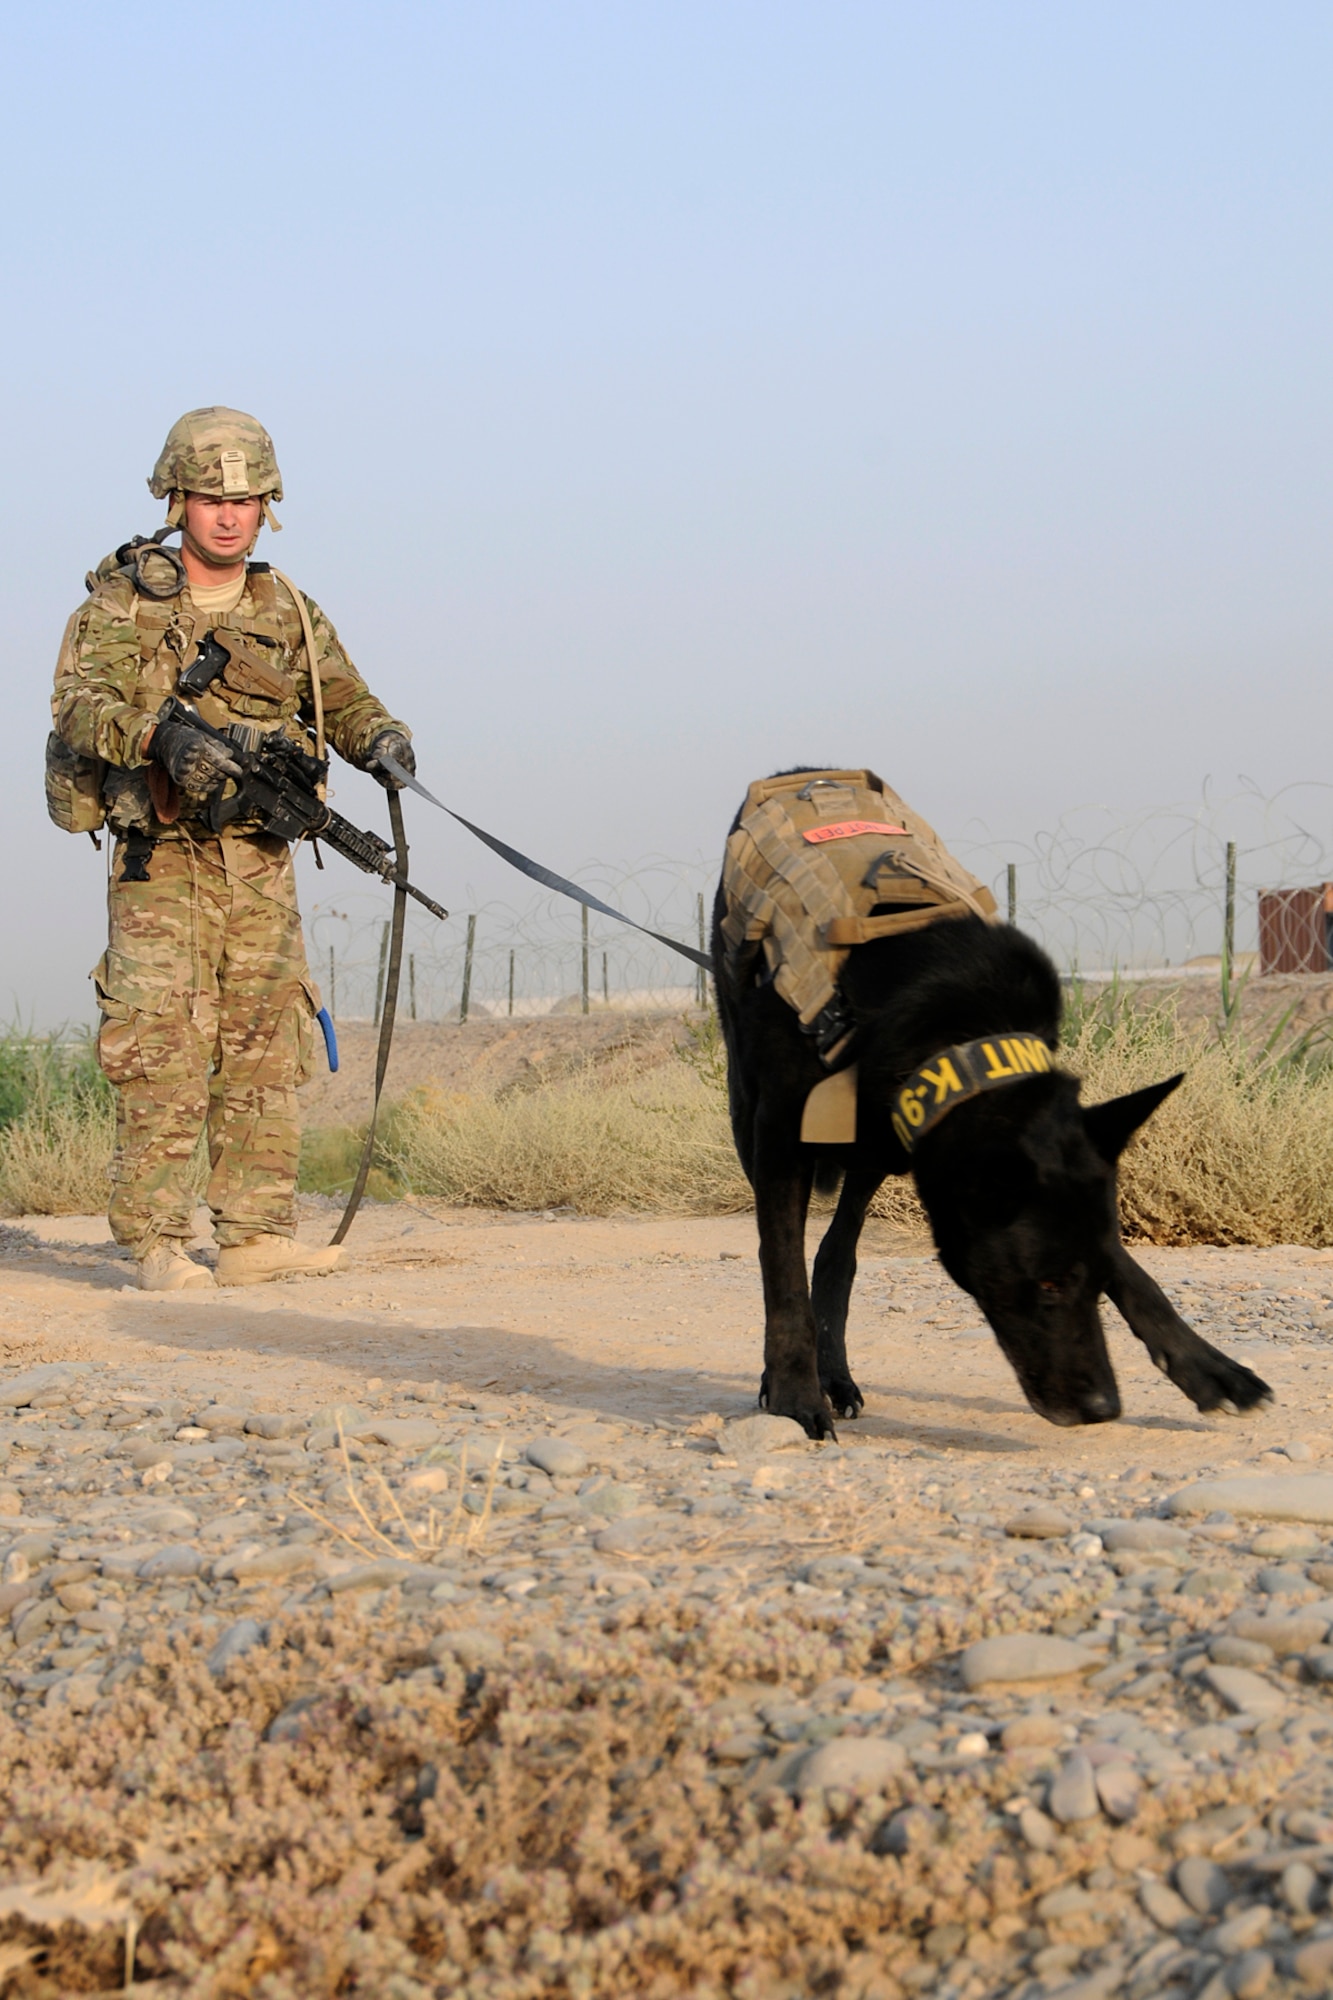 U.S. Air Force Staff Sgt. Larry Harris, a Military Working Dog handler, and his dog, Aaron, run through a training exercise looking for simulated explosives buried along a road at Kandahar Airfield, Afghanistan on July 9, 2012. The handlers and their dogs rotate through Kandahar Airfield for validation prior to moving out to Forward Operating Bases around the country where they will lead combat foot patrols and sniff out IEDs and other explosives. (U.S. Air Force photo/TSgt. Stephen Hudson) 